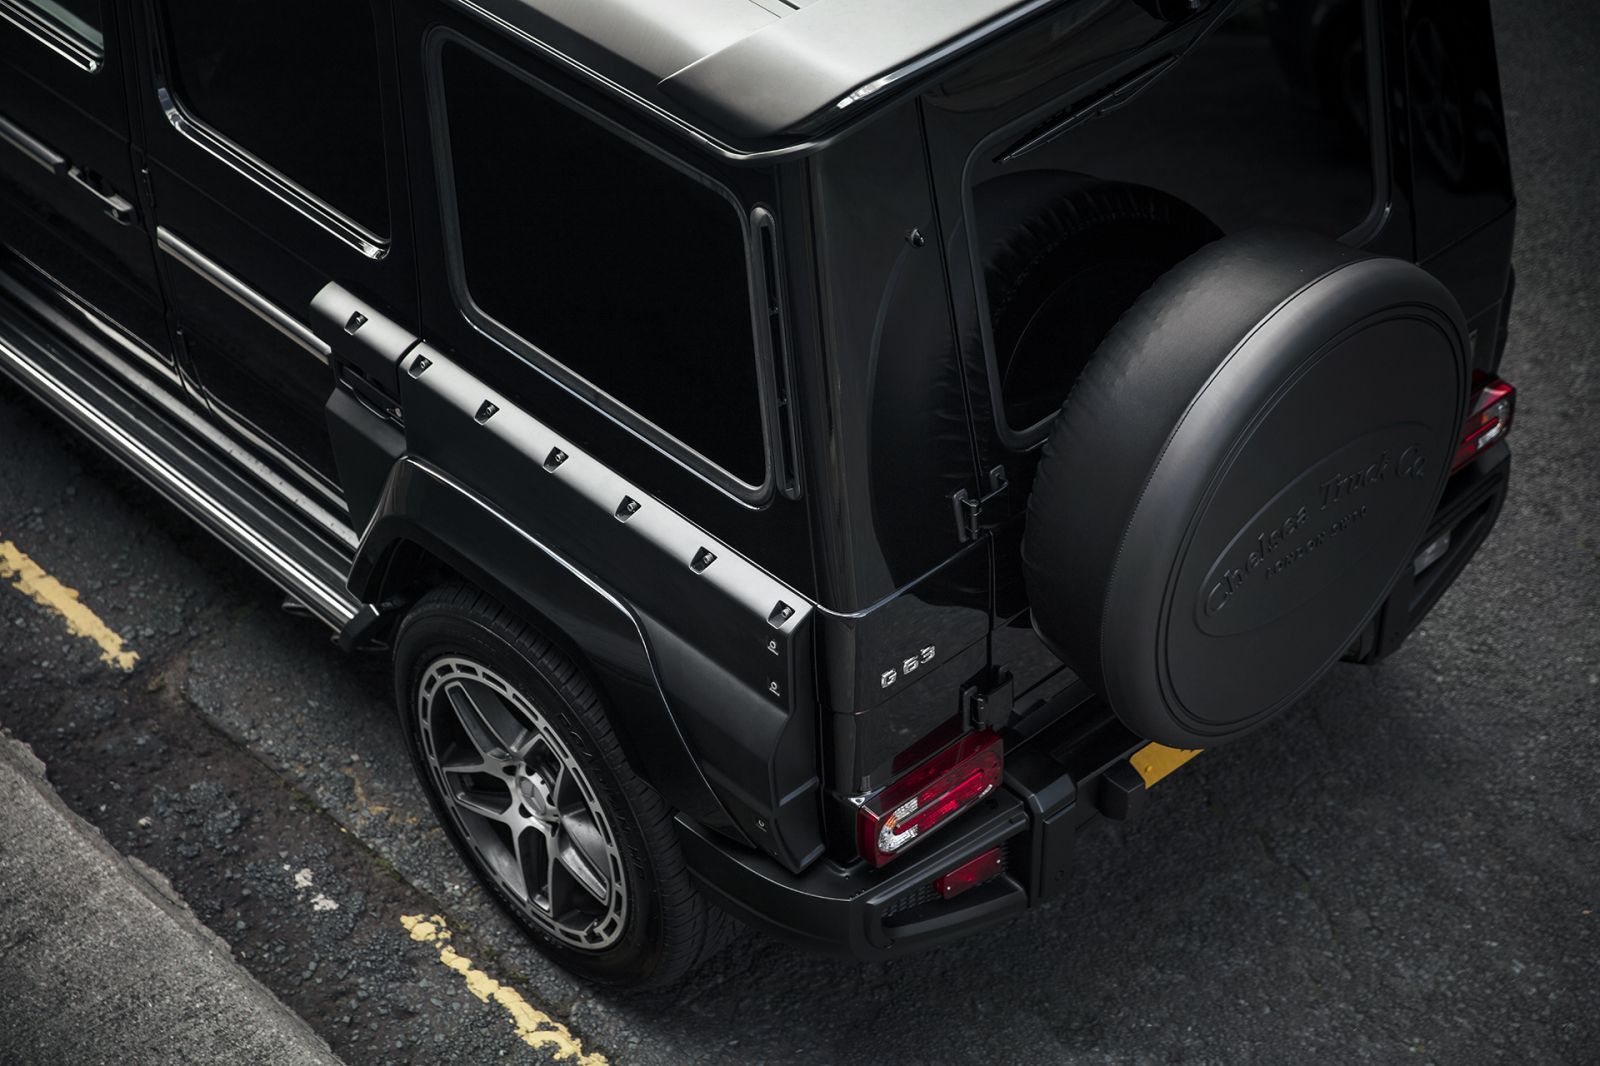 Mercedes G-Wagon (1990-2018) Wide Wing Exterior Body Styling Pack Image 5216